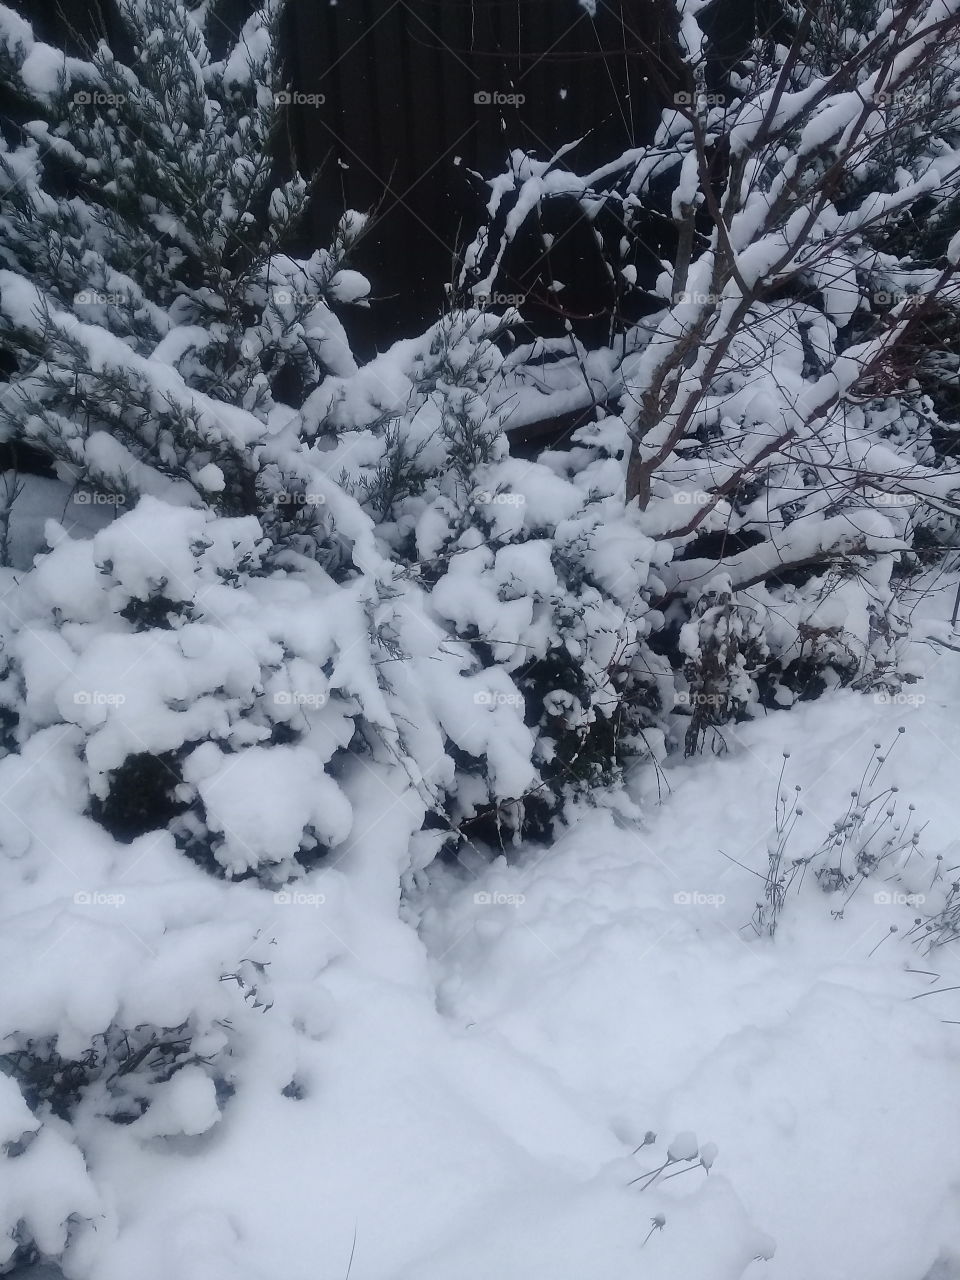 The first snow in this year